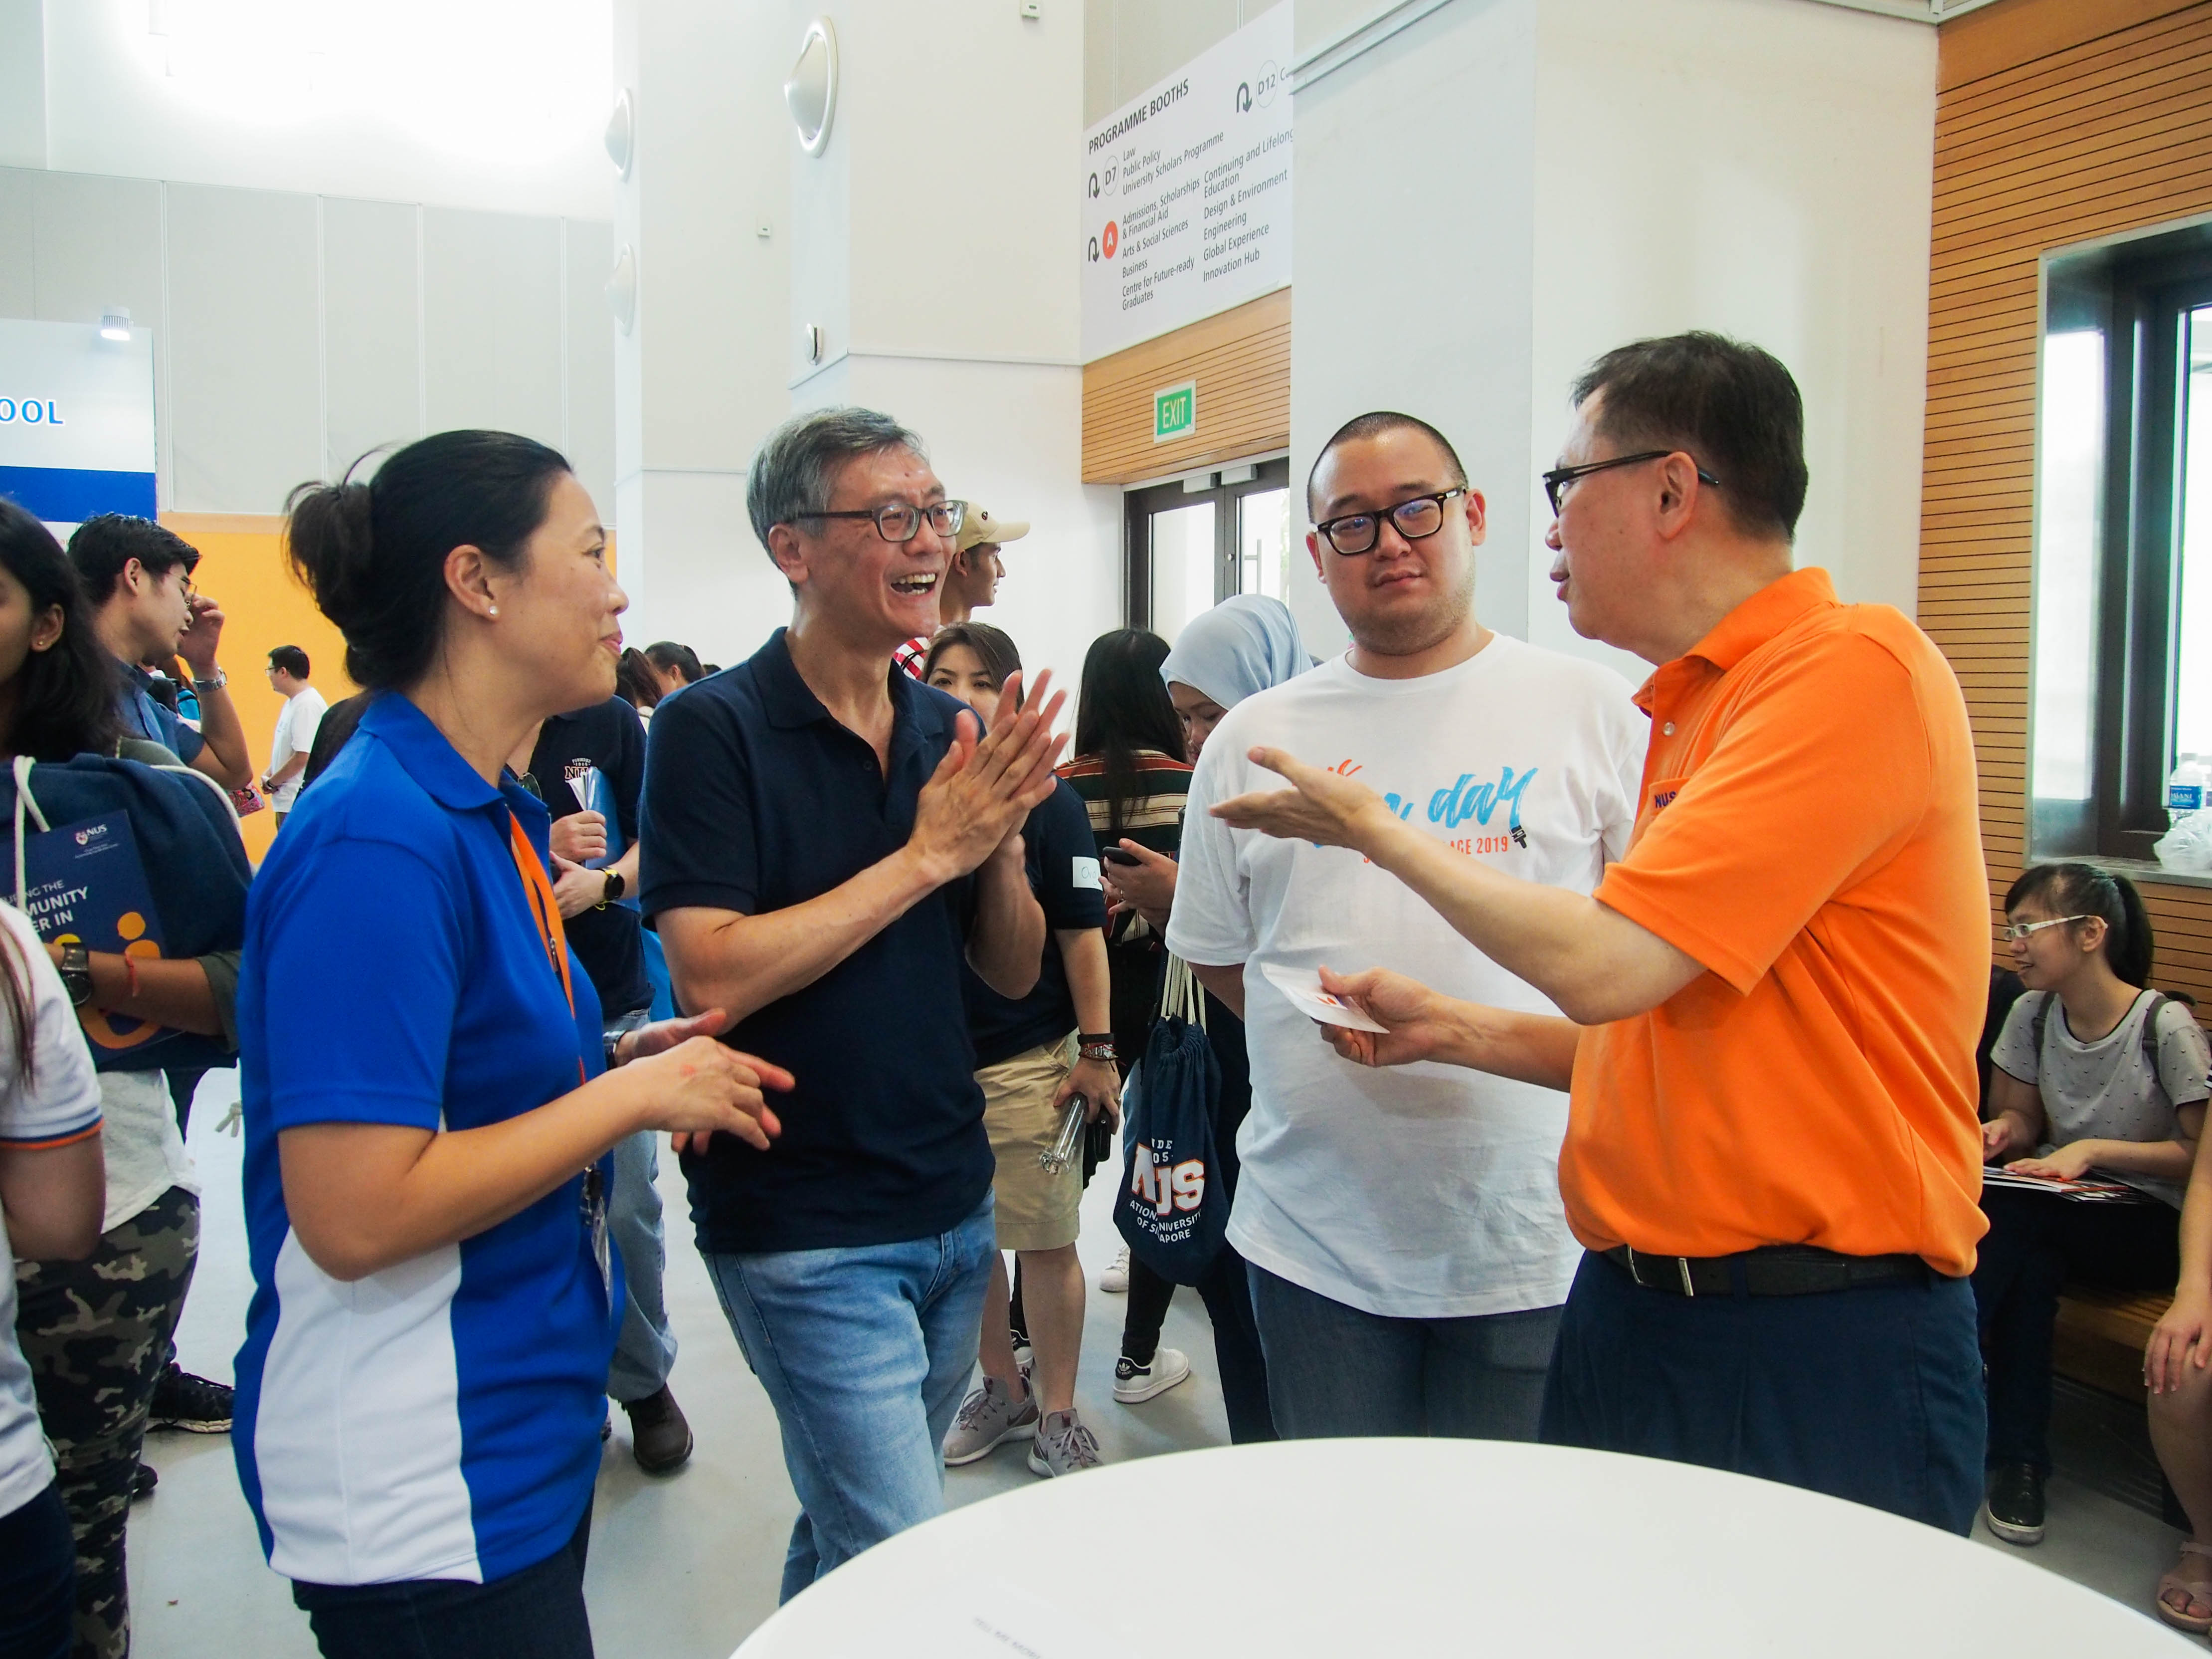 A/Prof Jeannette Lee with Prof Tan Eng Chye, NUS President and Prof Ho Teck Hua, NUS Senior Deputy President and Provost (1st from right) at the SSHSPH Booth at NUS Open Day 2019